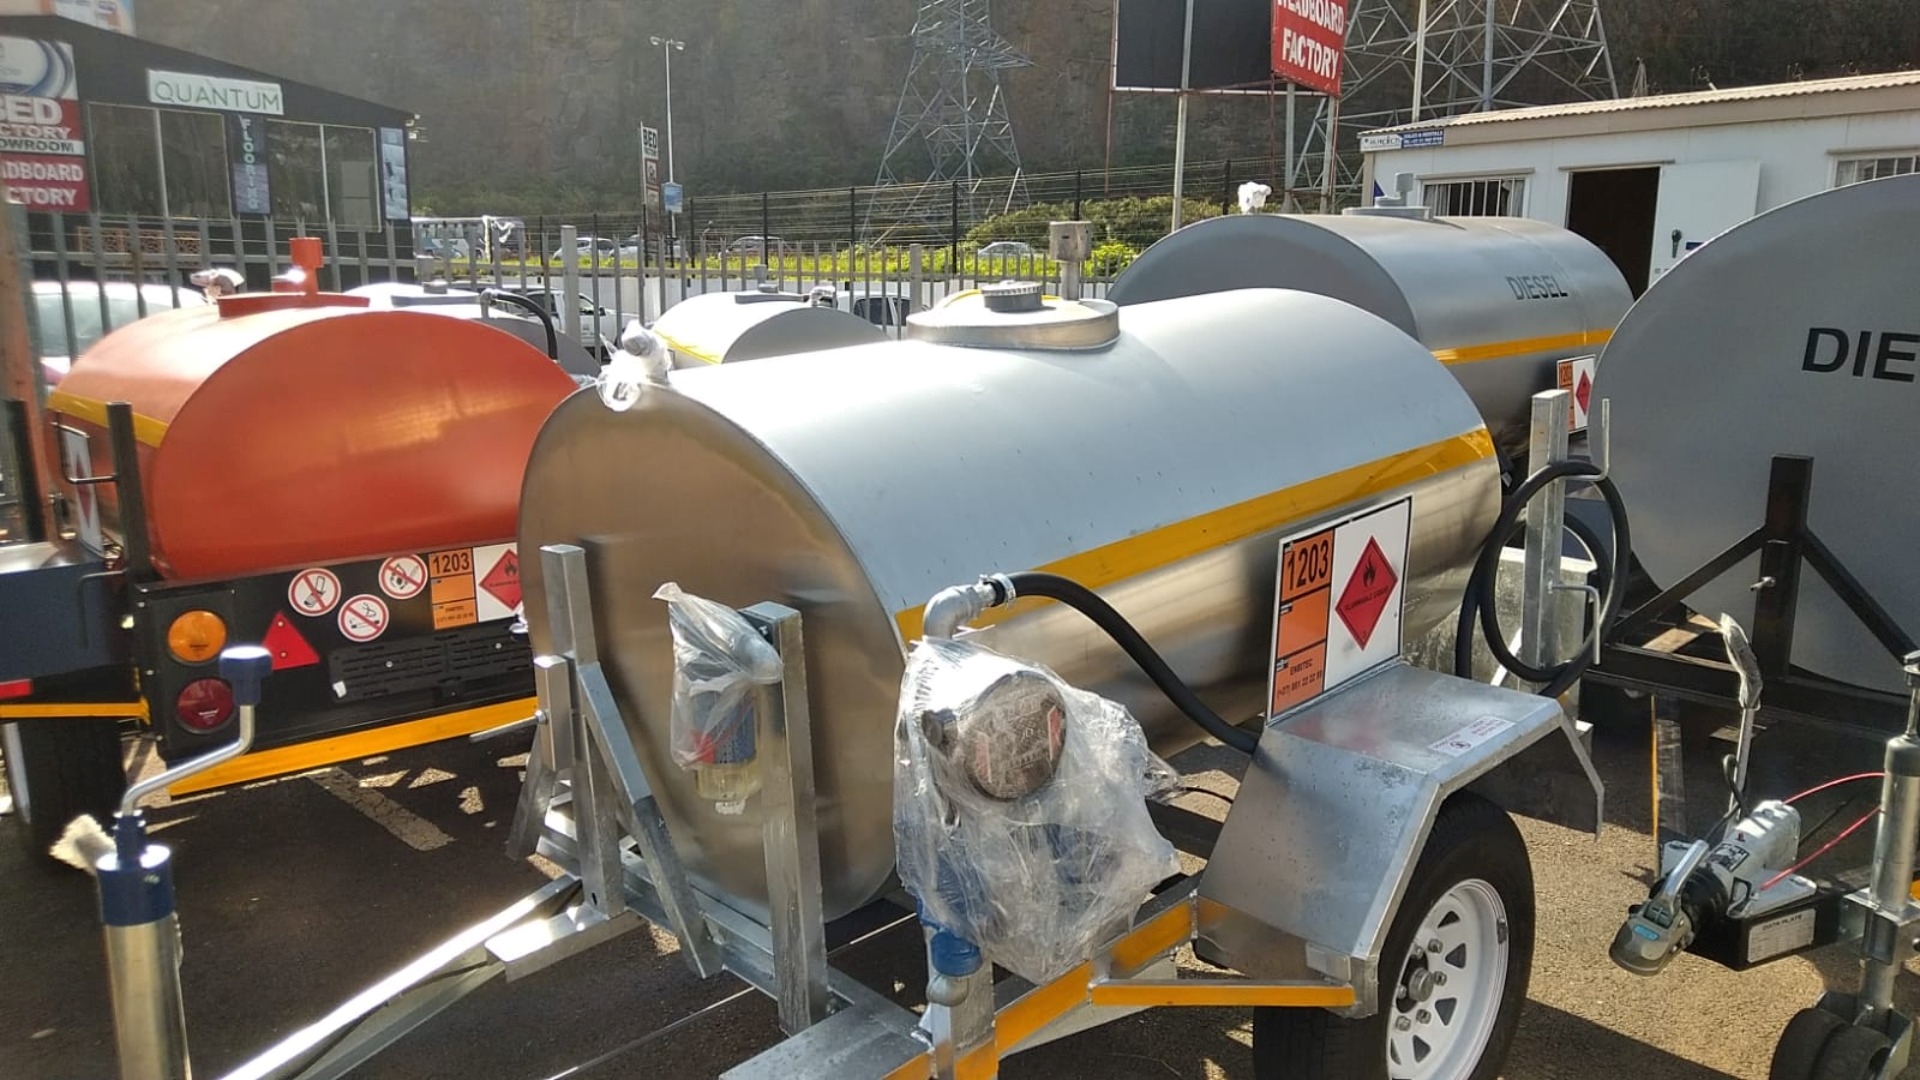 Custom Diesel bowser trailer 1500 Litre Stainless Steel Bowser FOR PETROL/AVGAS 2022 for sale by Jikelele Tankers and Trailers   | Truck & Trailer Marketplaces